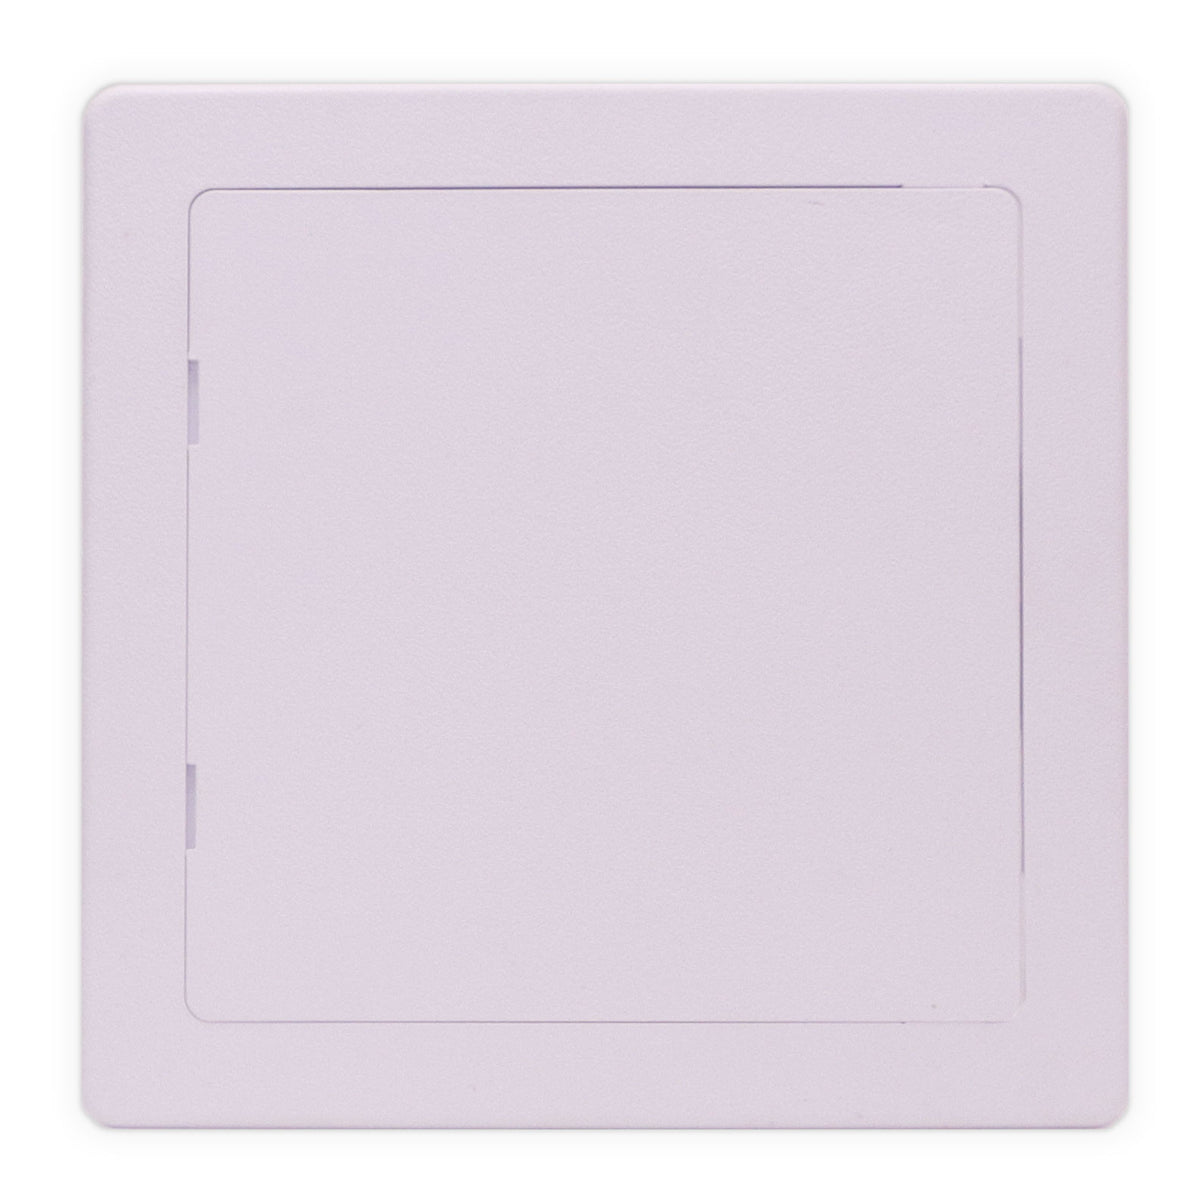 22&quot; X 22&quot; Plastic Access Panel Removeable/Reversable Door With Frame For Concealed Wall / Ceiling Application - [Outer Dimensions: 24&quot; Width X 24&quot; Height]